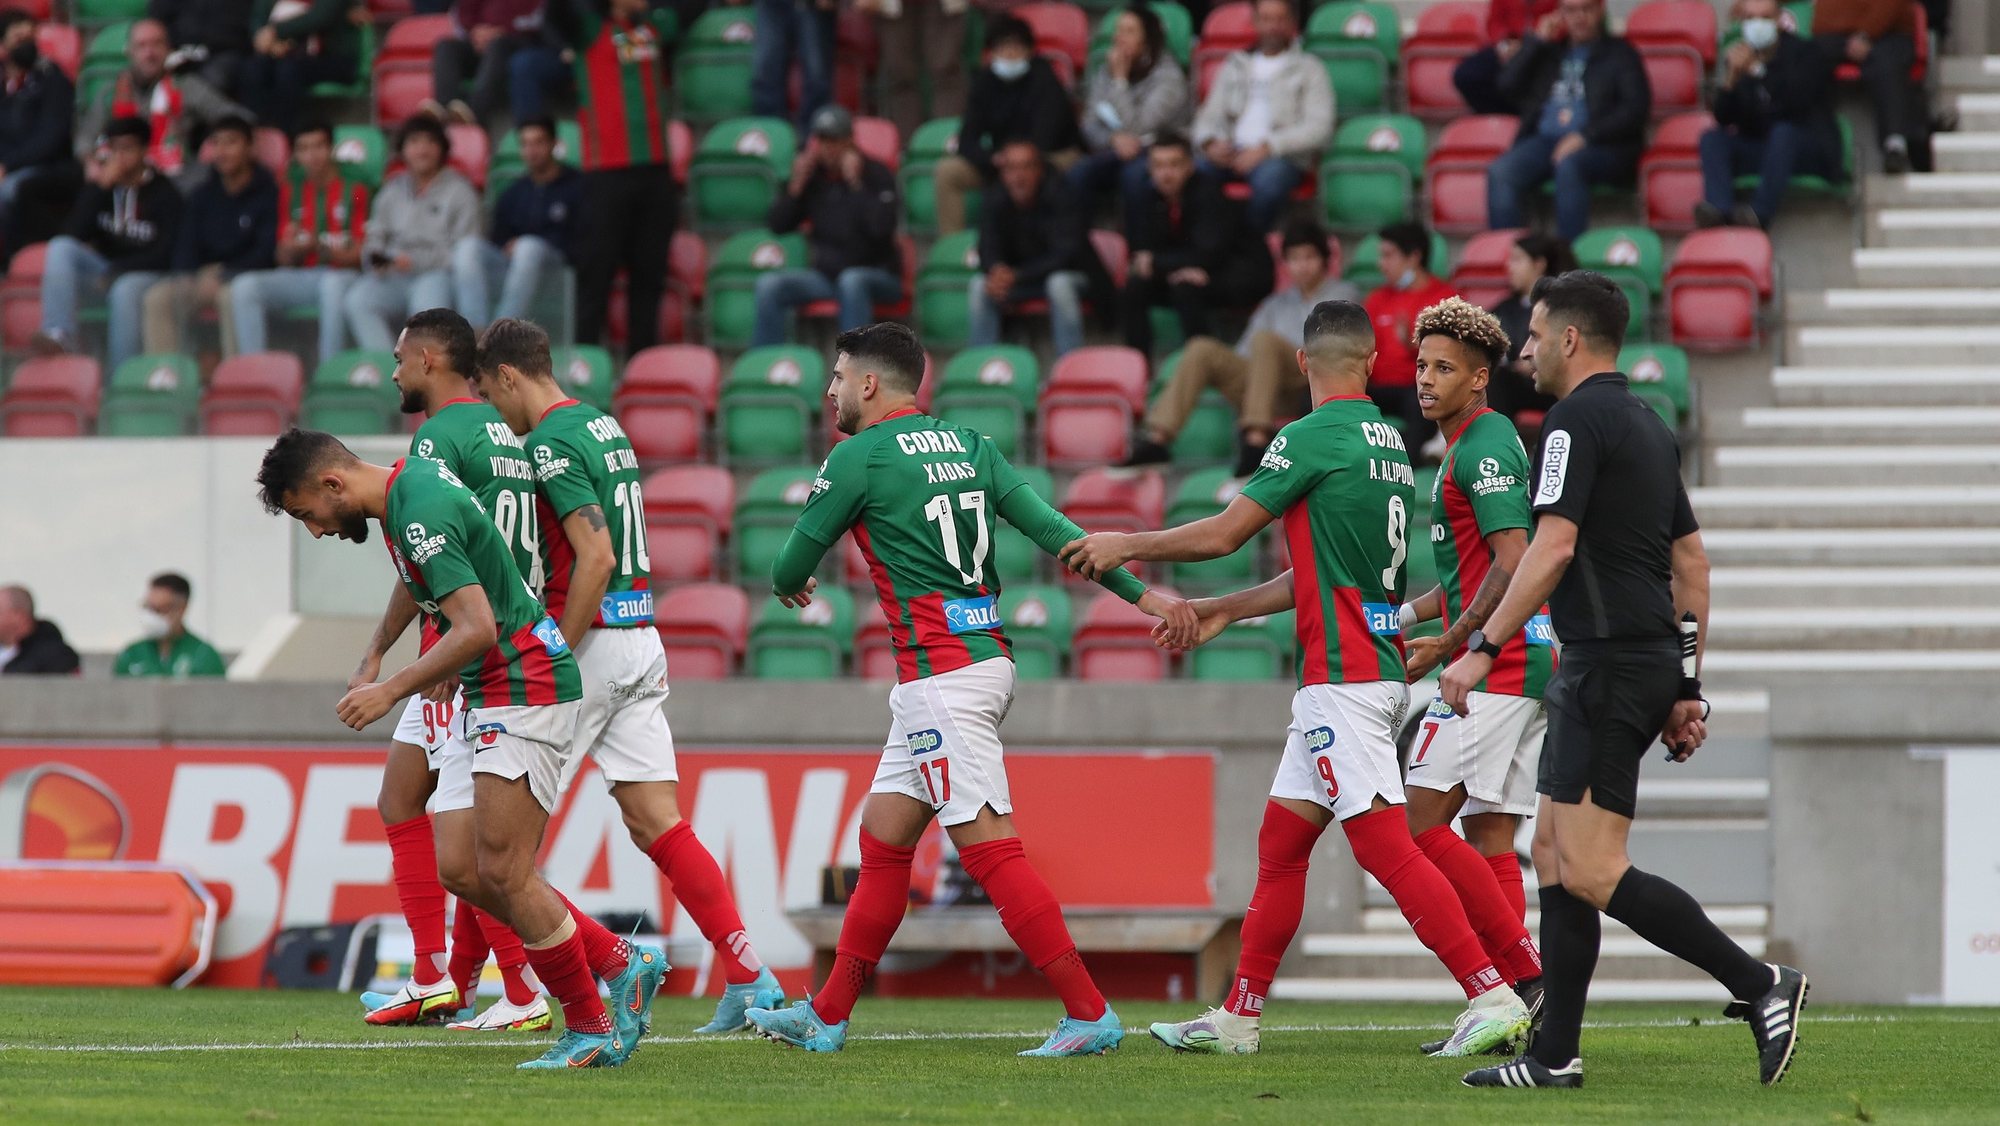 Maritimo`s player Xadas (C) celebrates after socoring a goal against Sporting during the Portuguese First League soccer match at Barreiros Stadium in Funchal, Portugal, 26 February 2022. HOMEM GOUVEIA/LUSA